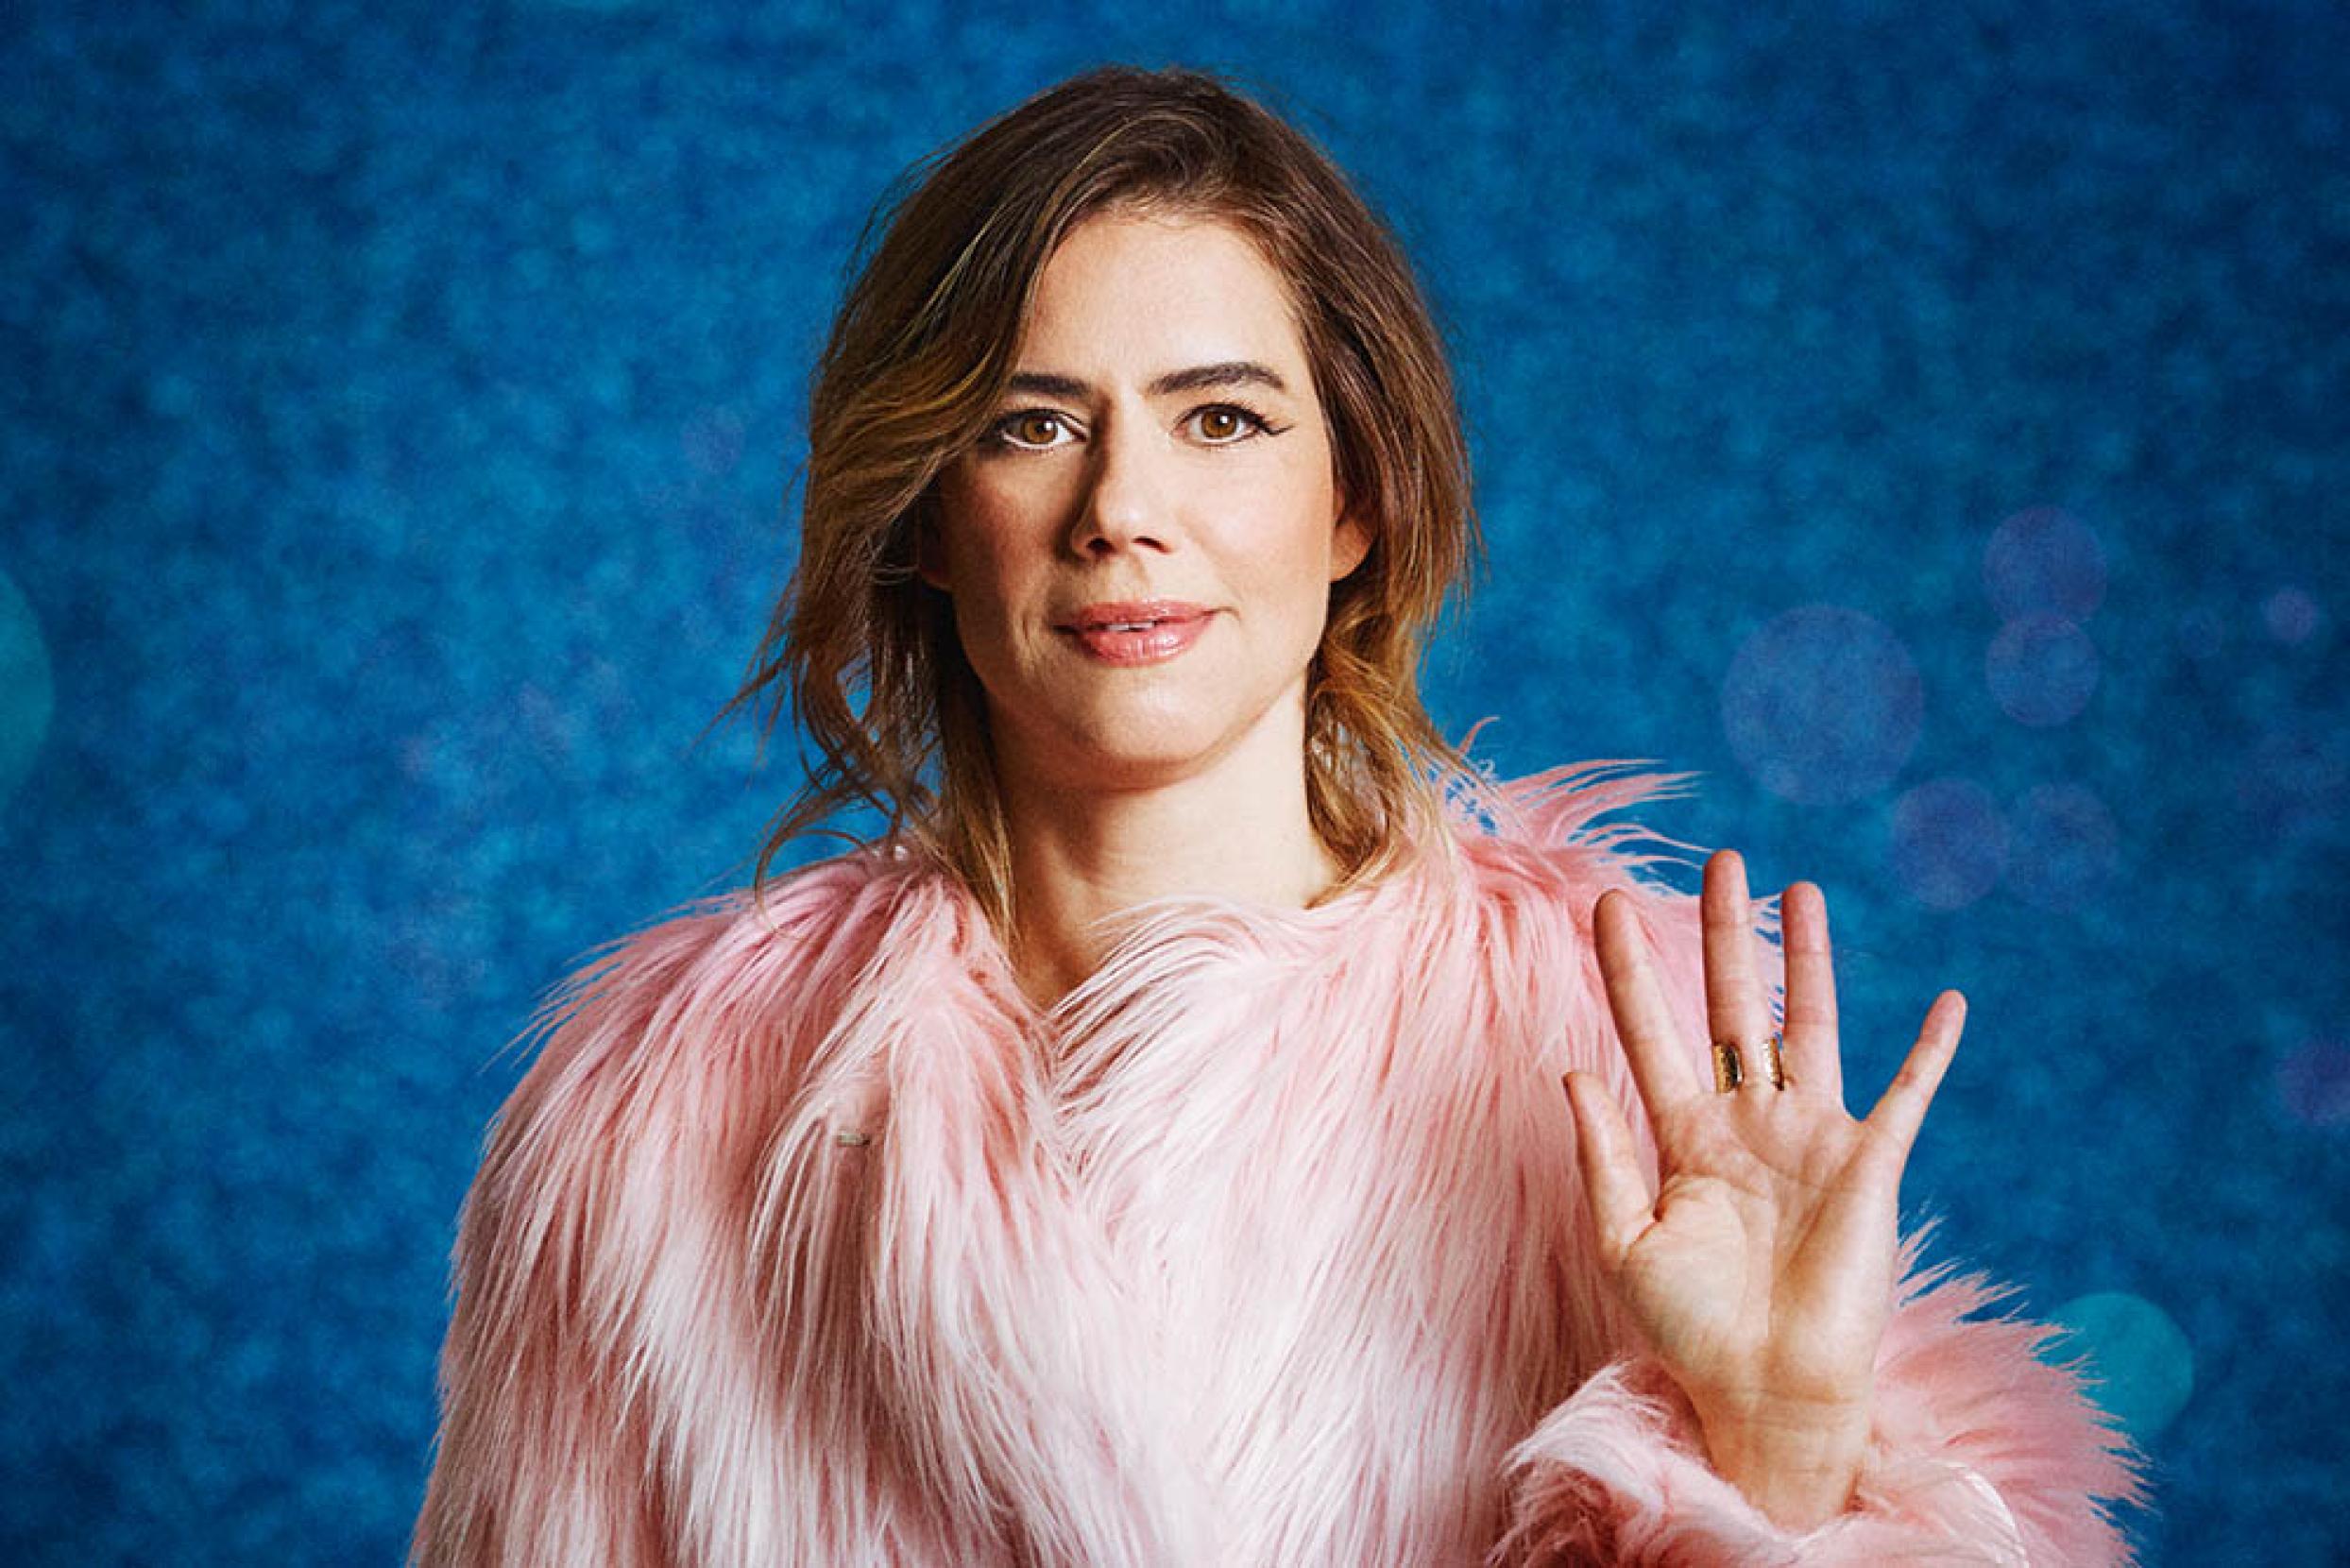 Comedian and writer Lou Sanders is the eighth celebrity confirmed for Dancing on Ice